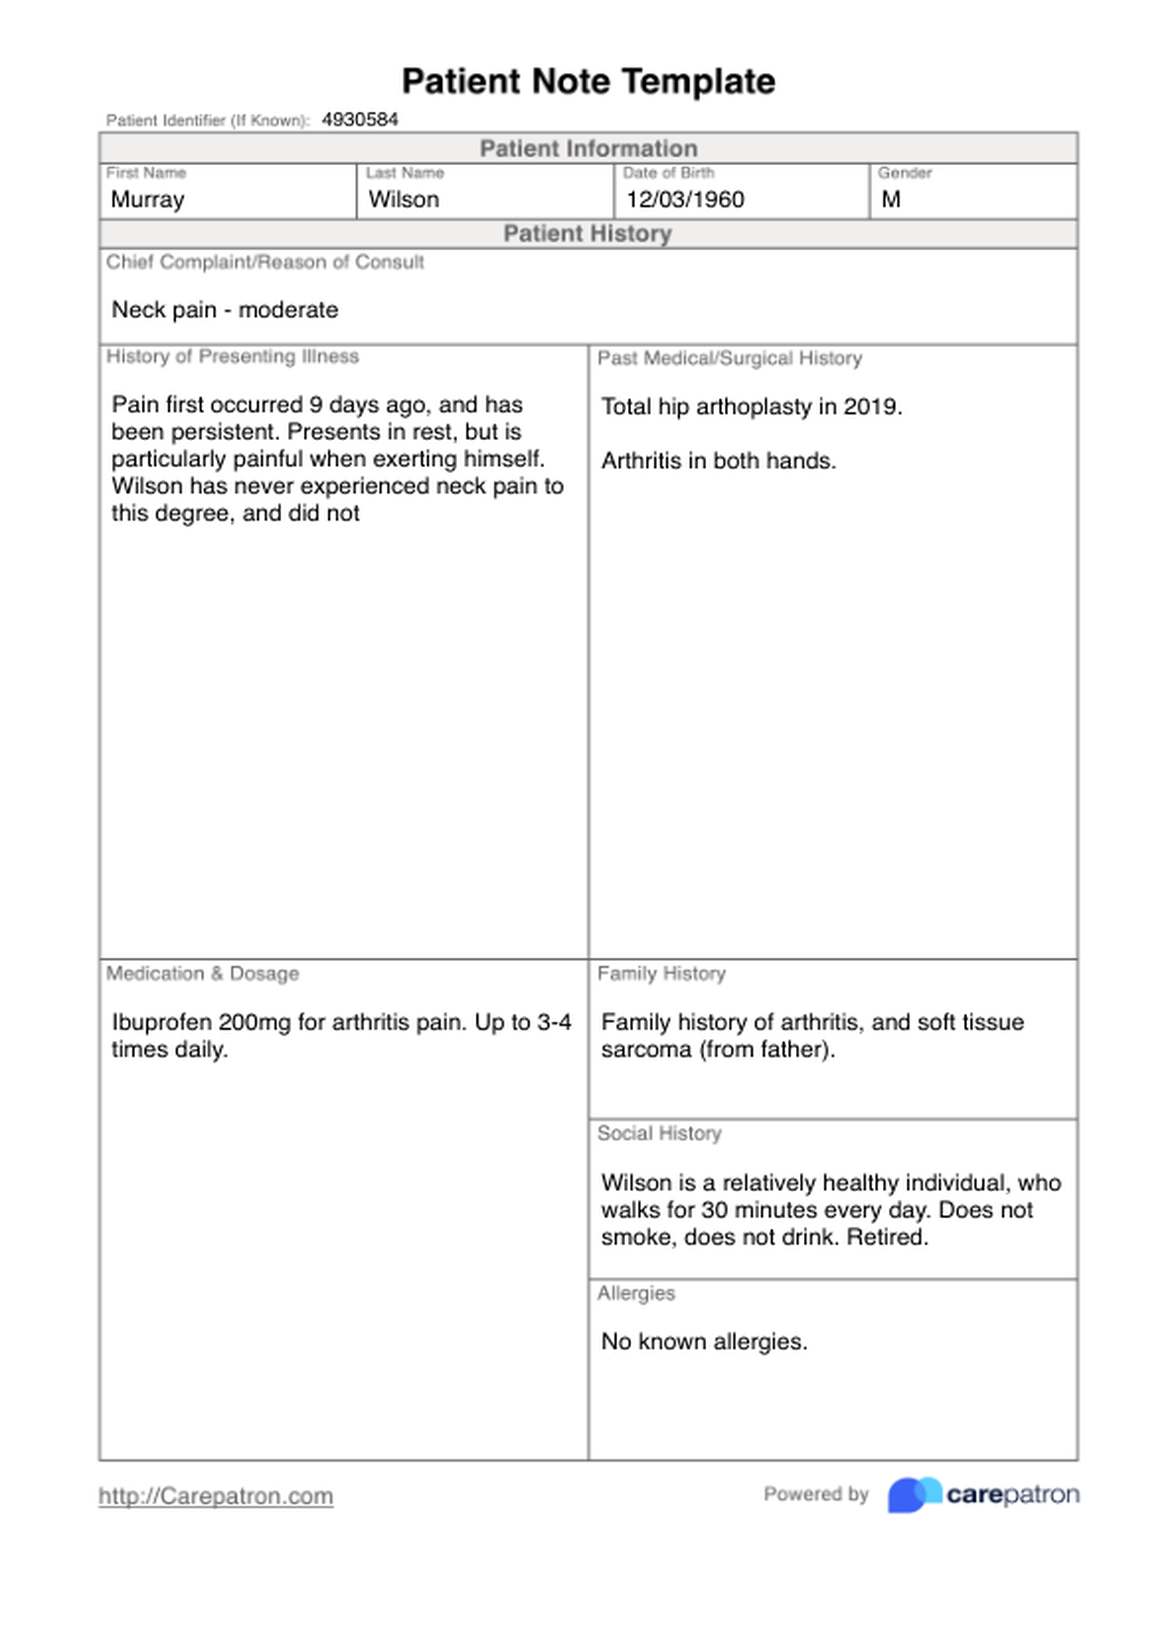 Patient Note Template PDF Example